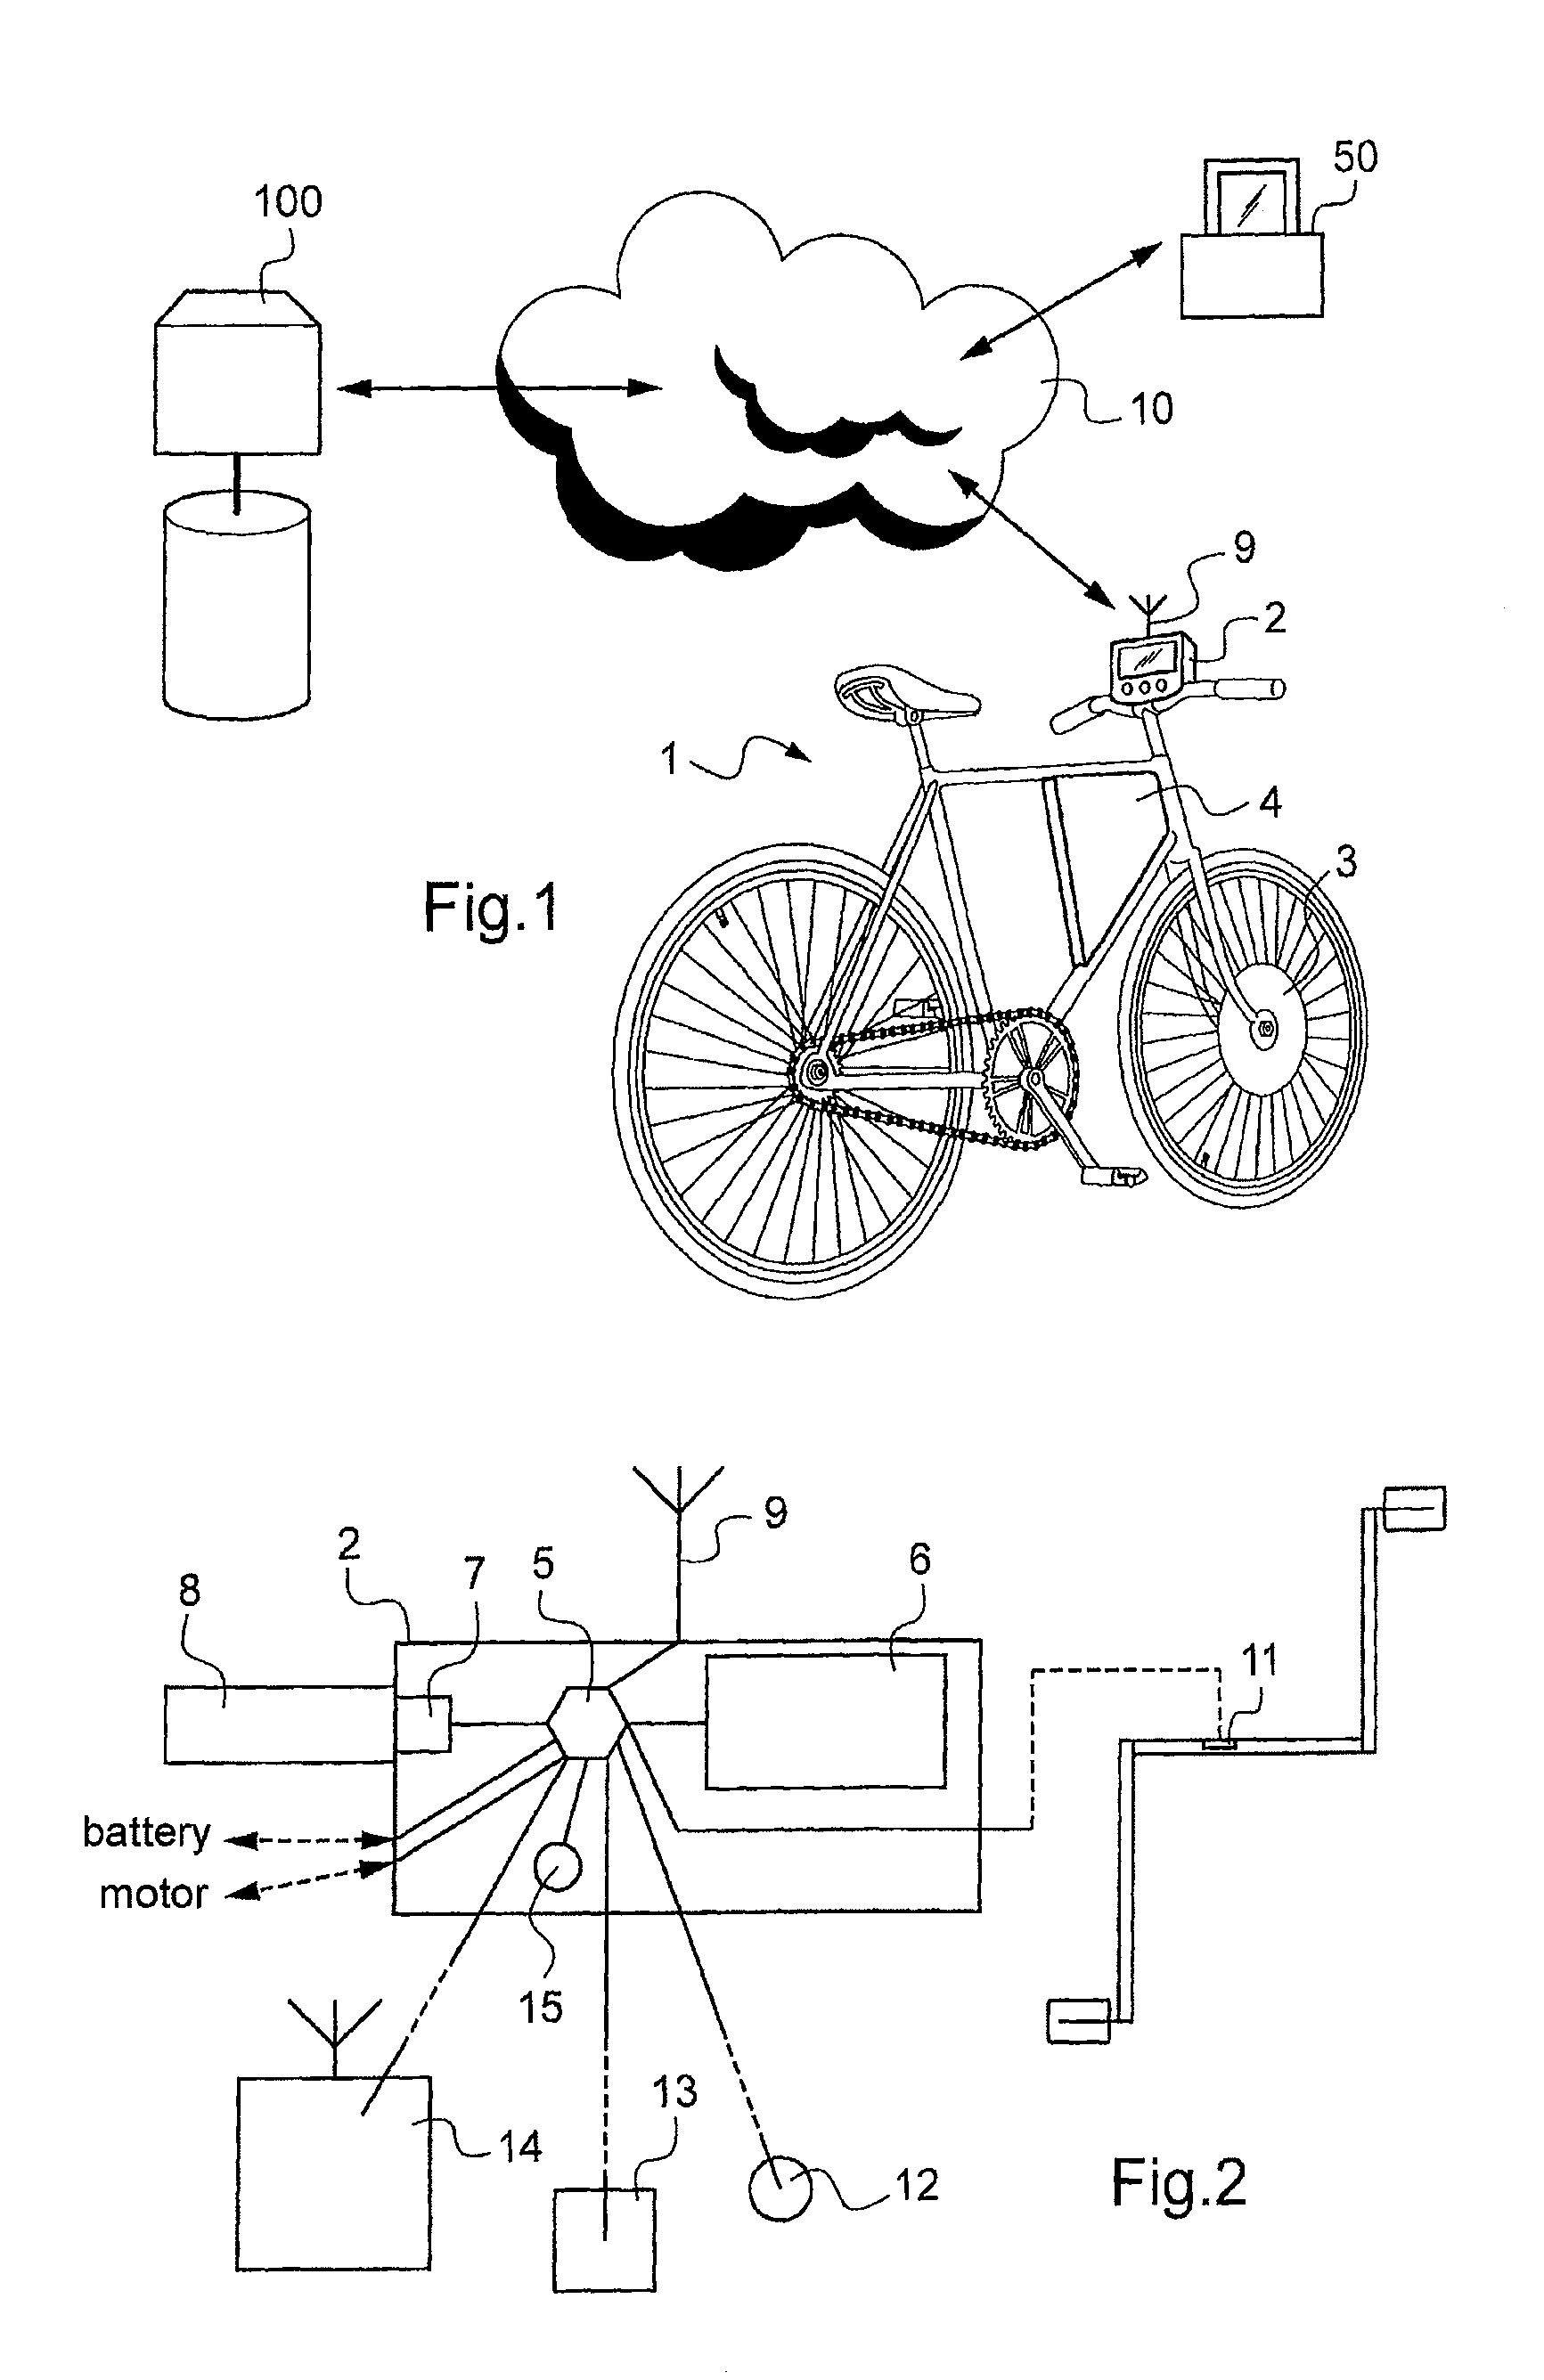 Method for managing the strain of a user of a human propulsion vehicle, and vehicle adapted for said method